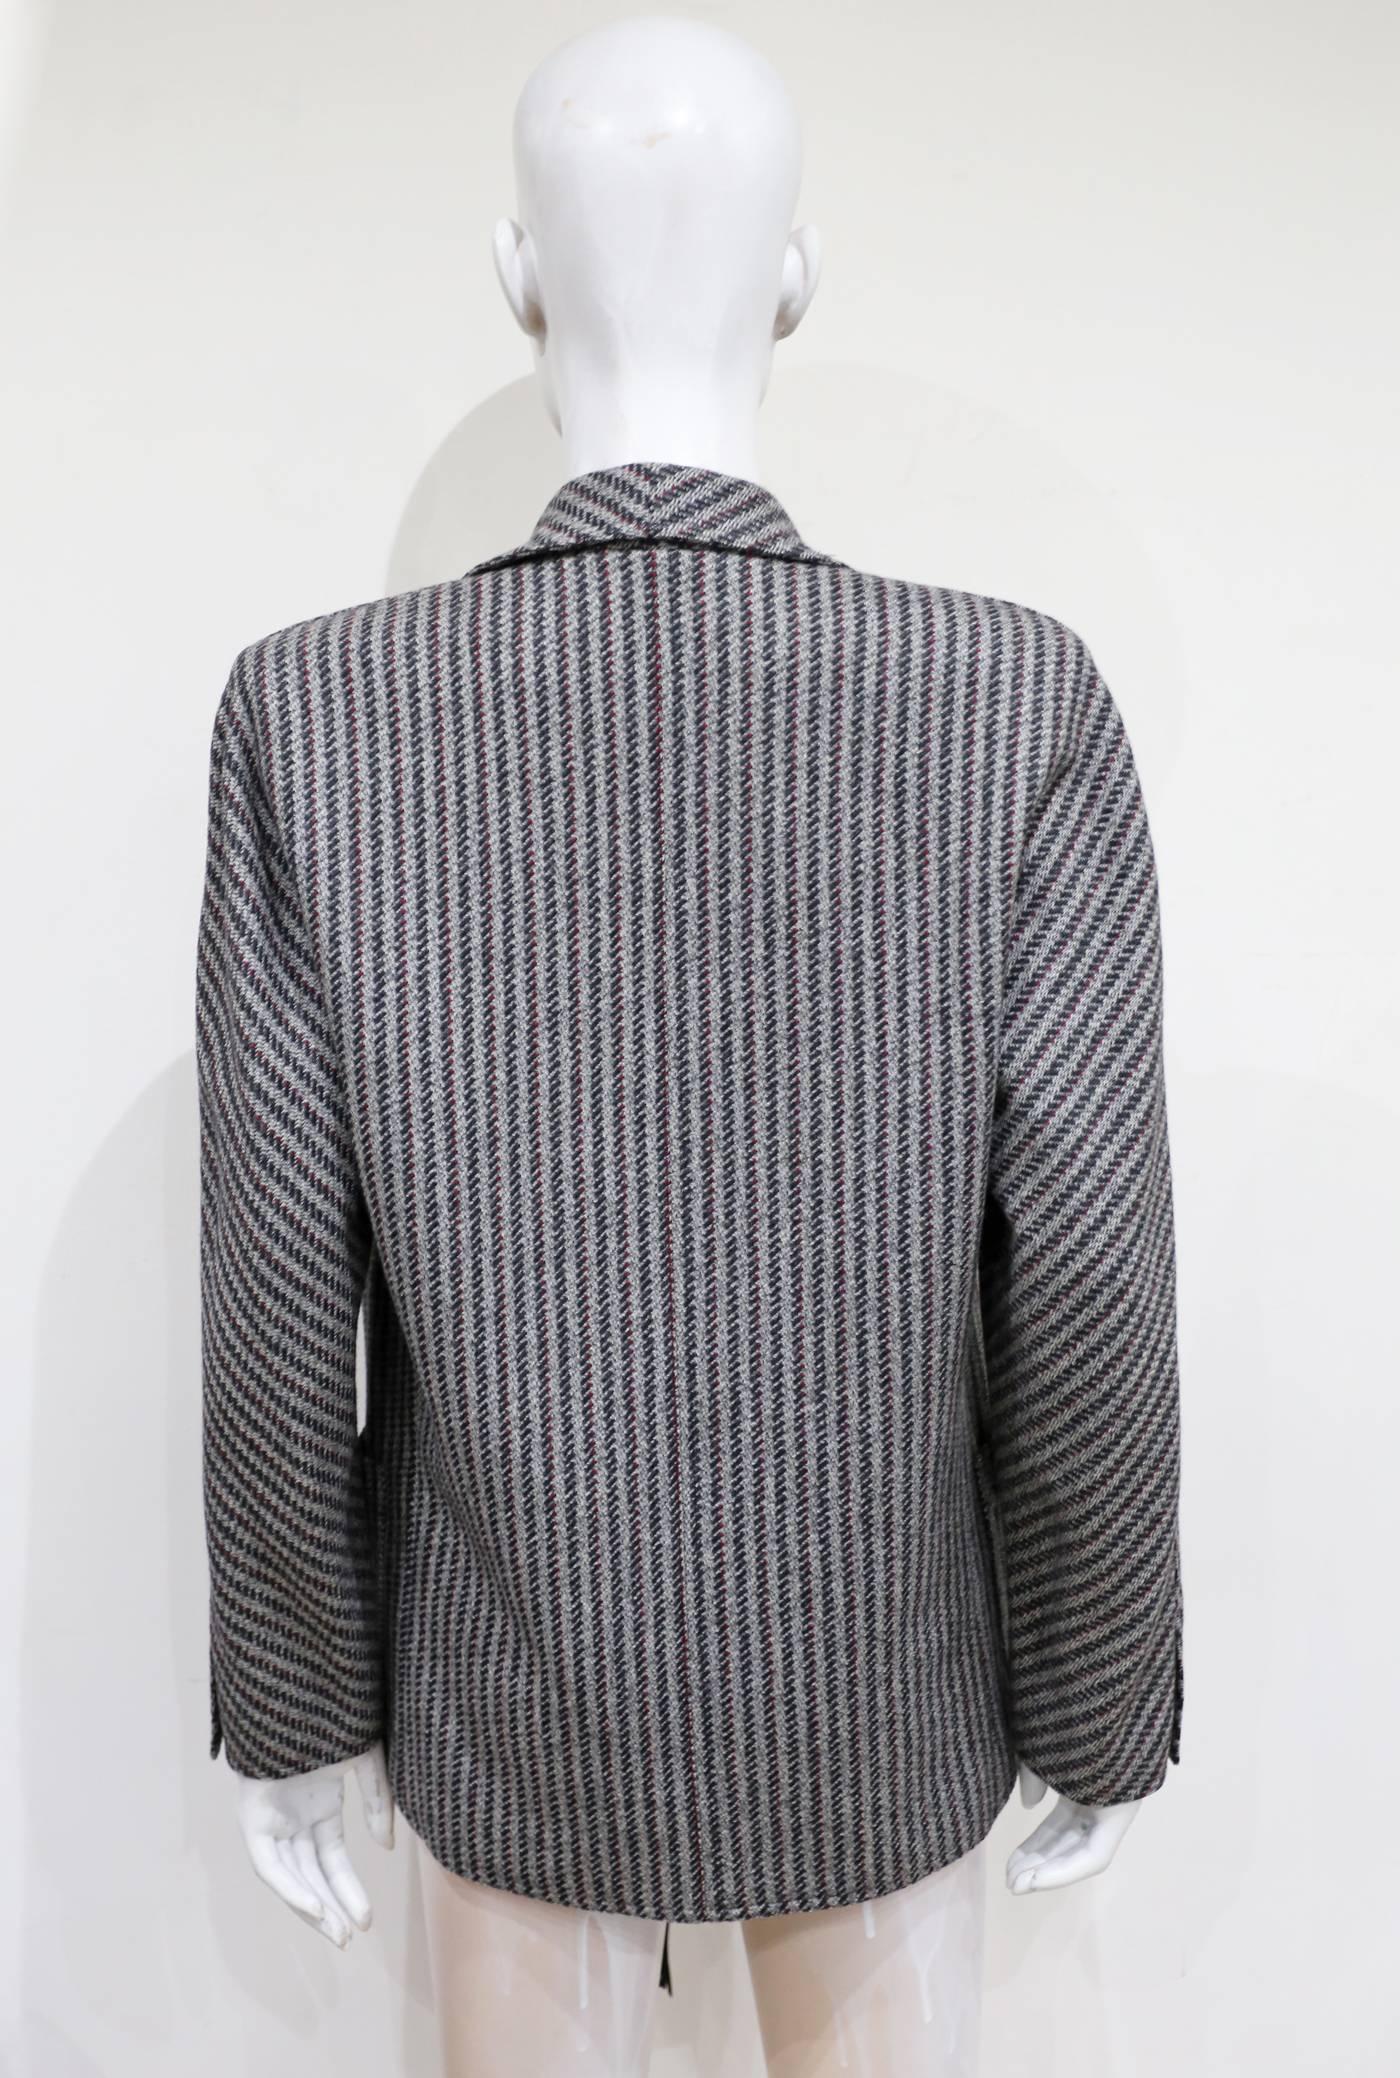 Gucci tweed and leather blazer, c. 1980s 2